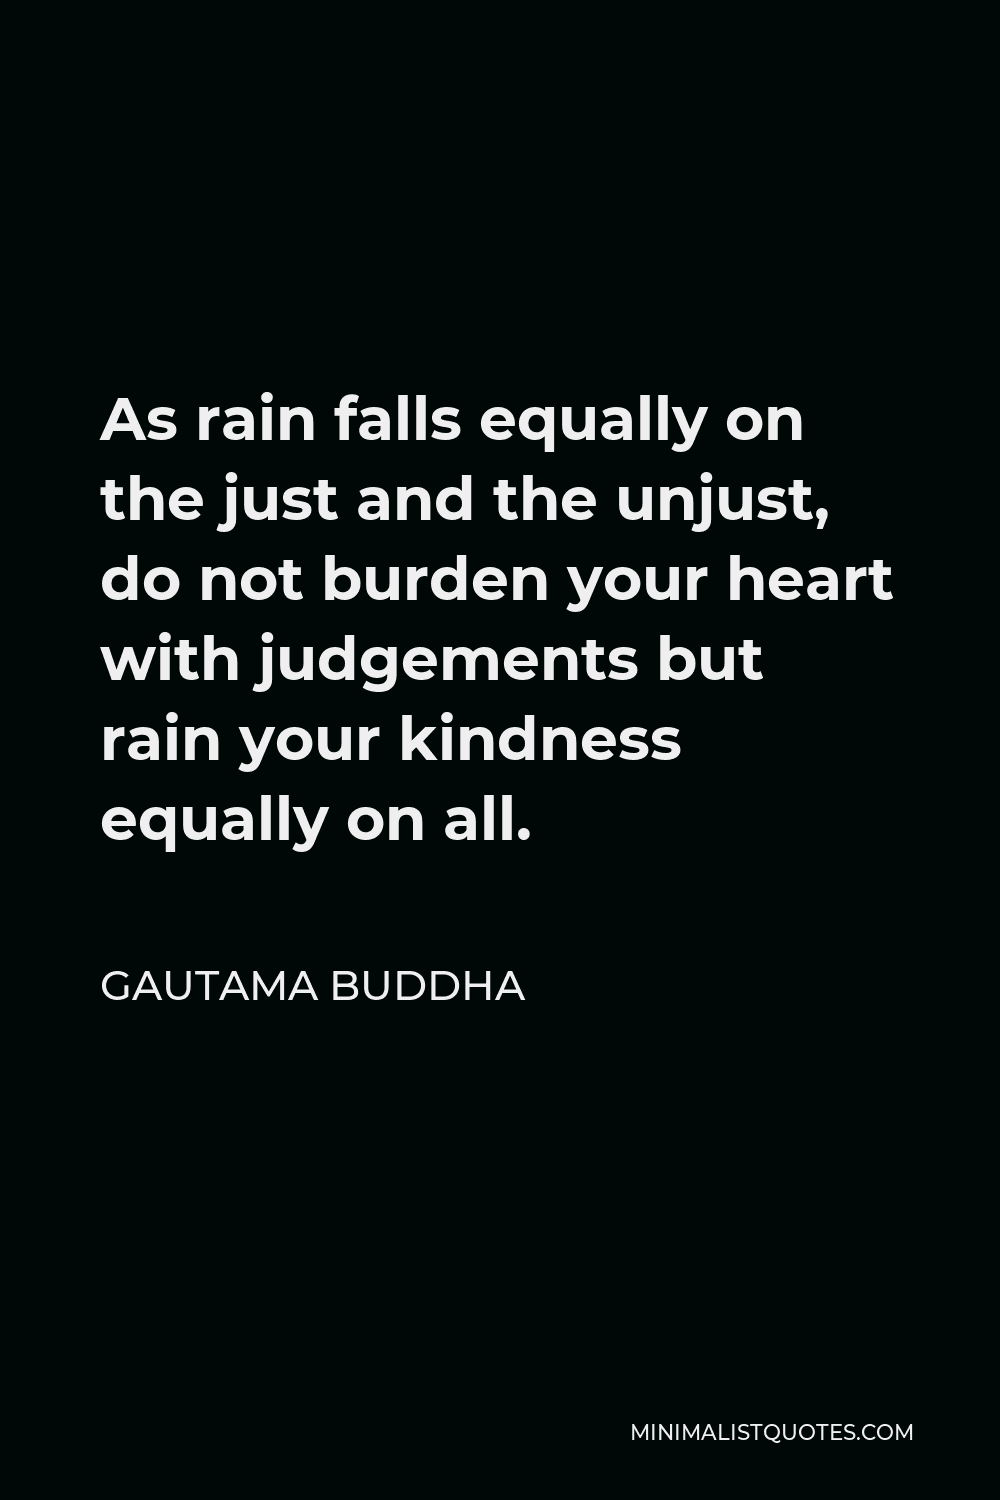 Gautama Buddha Quote - As rain falls equally on the just and the unjust, do not burden your heart with judgements but rain your kindness equally on all.